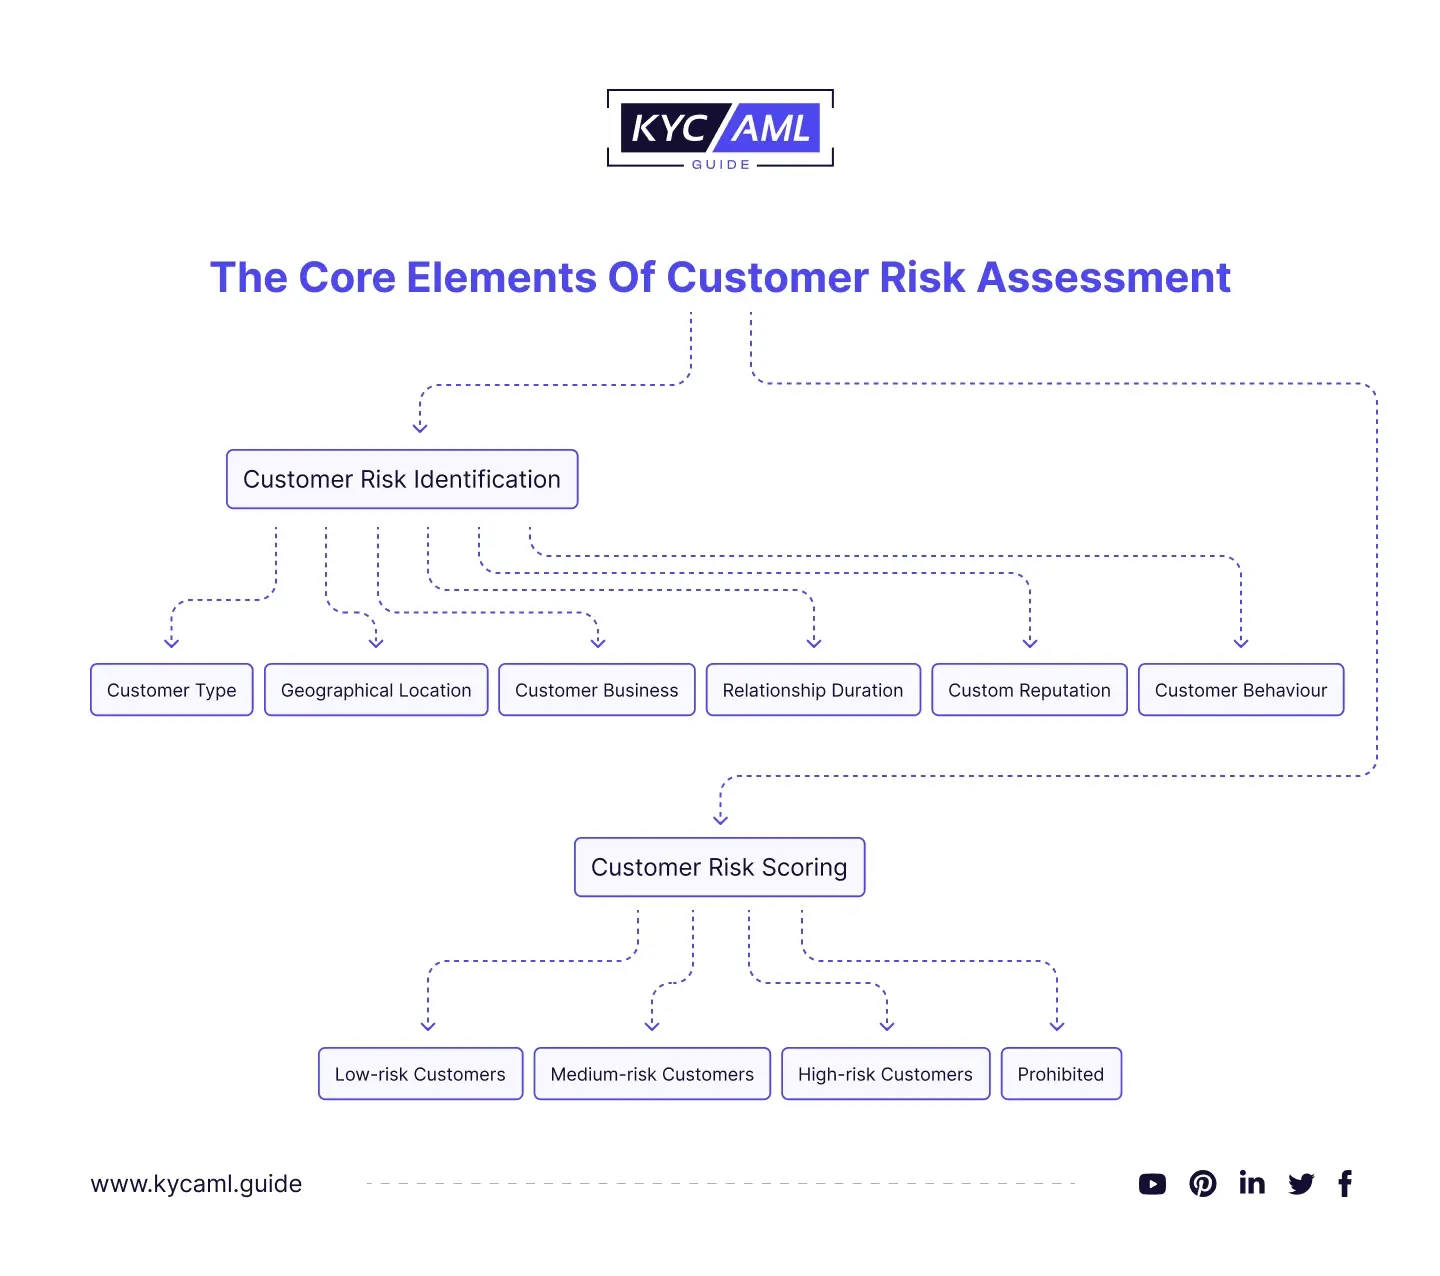 The Core Elements of Customer Risk Assessment (1)